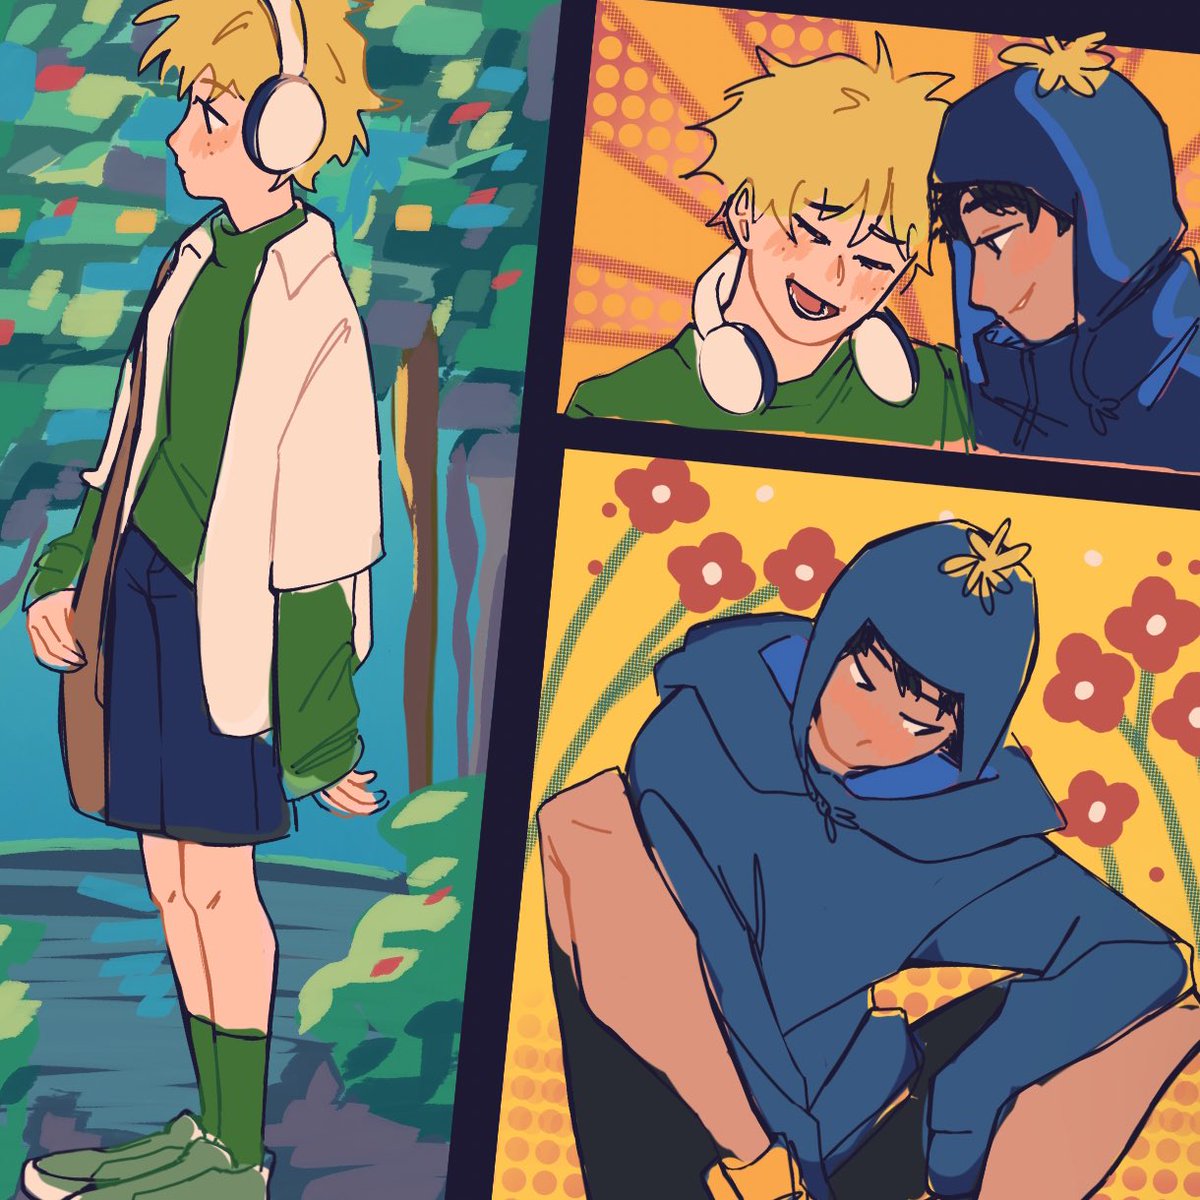 Maybe I’ll finish this Creek later